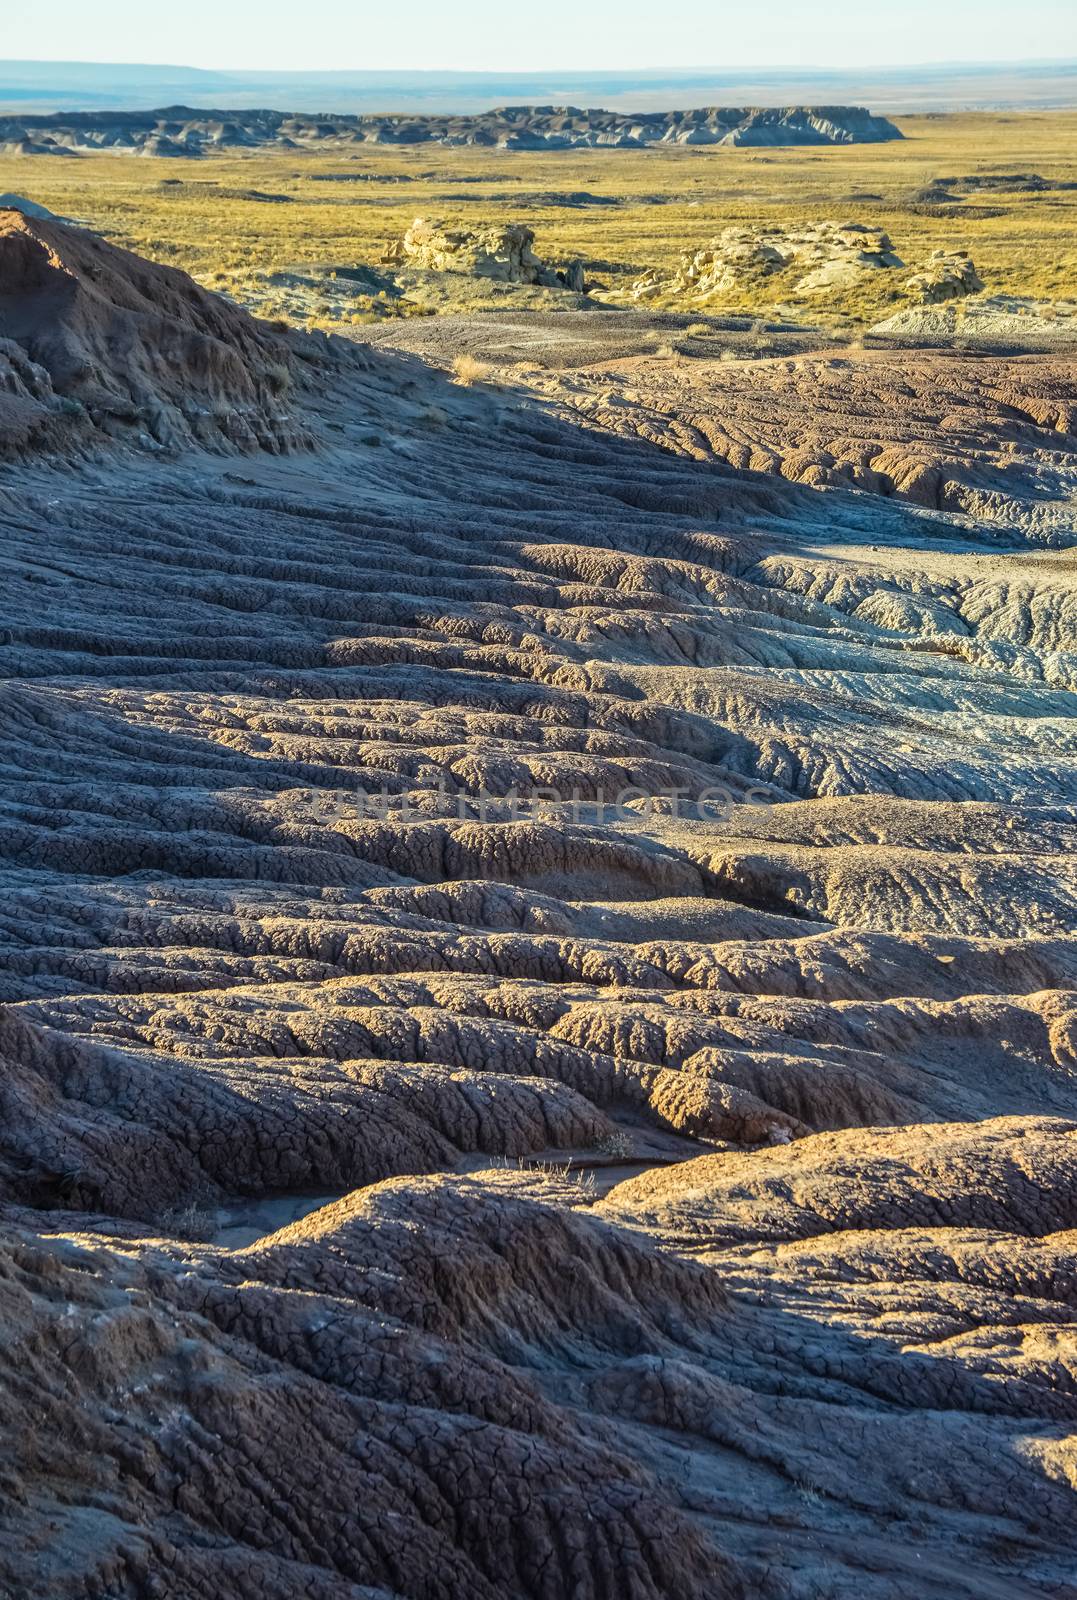 Landscape, panorama of erosive multi-colored clay in Petrified Forest National Park, Arizona